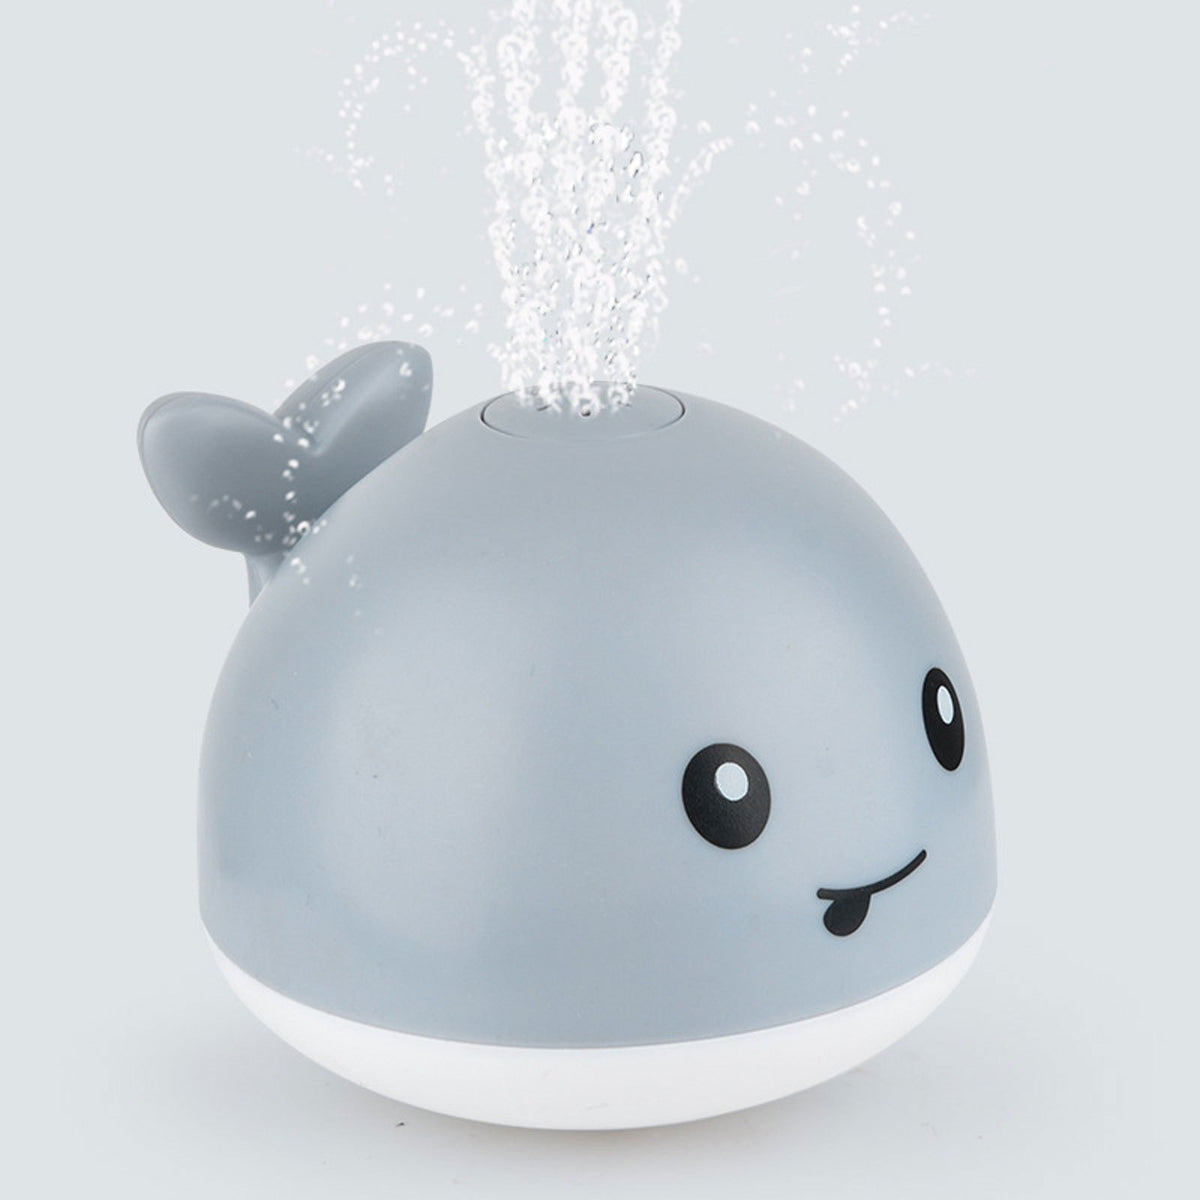 Whale Bath Toy, Light Up Baby Bathtub Toys With Automatic Spray Water And Colorful LED Light,Induction Sprinkler Bathroom Cykapu